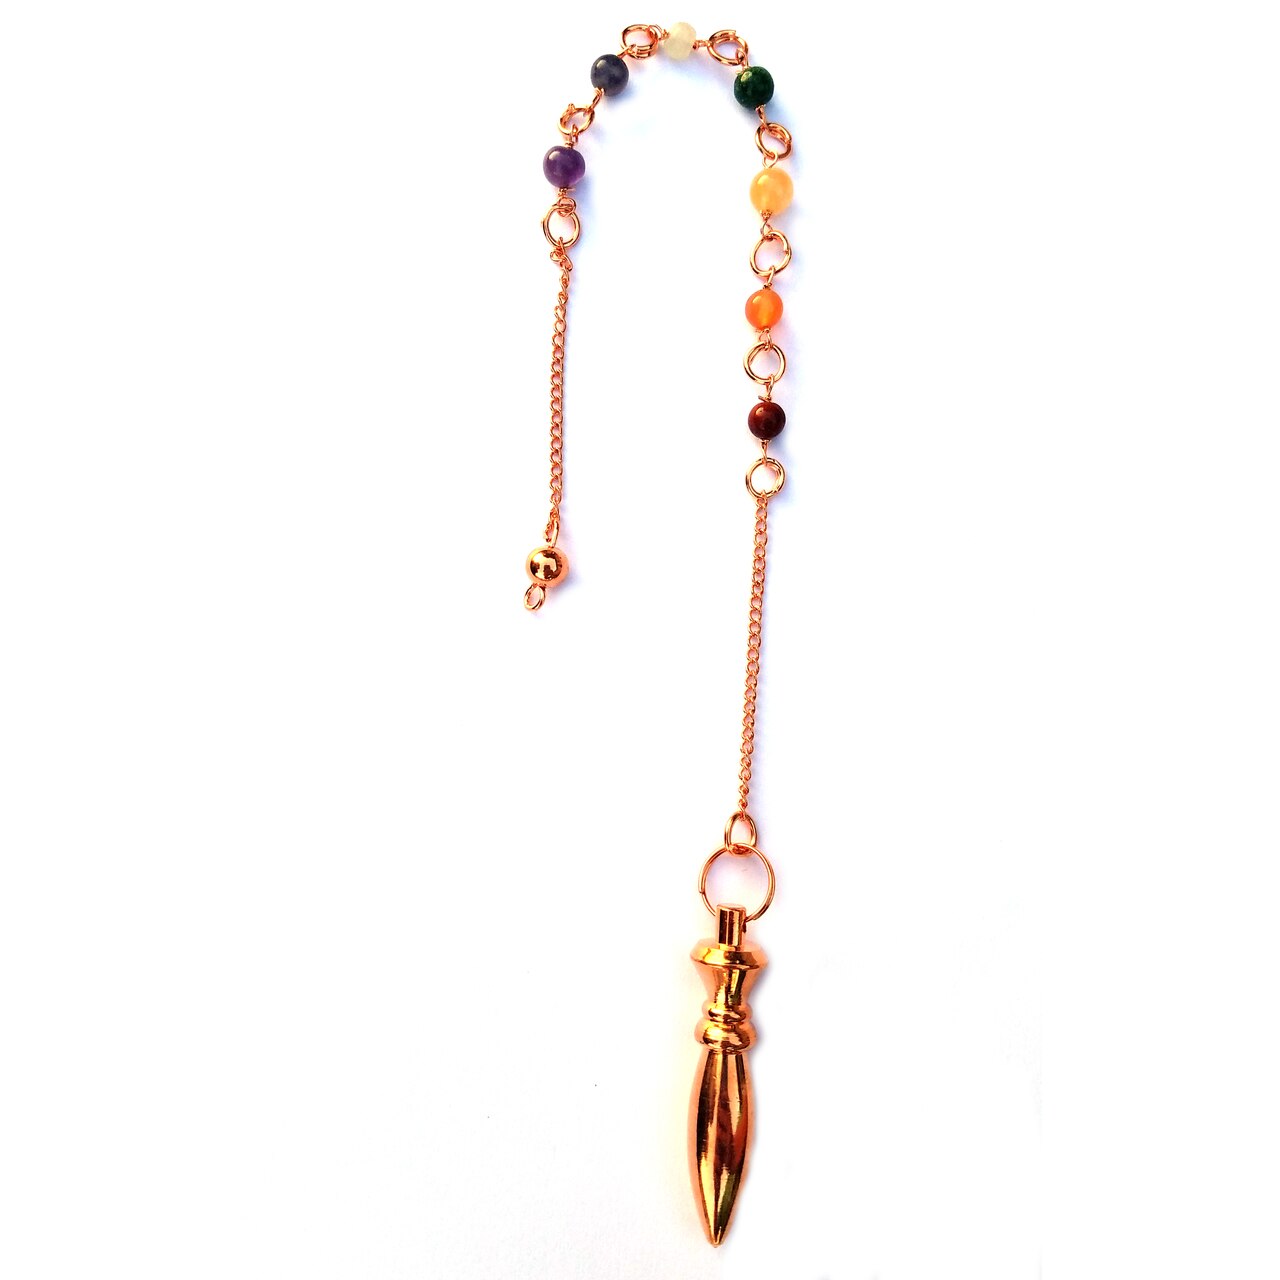 Chakra Copper Pendulum #5 with Sphere Bob for Divination, Scrying, Dowsing & Fortune Telling